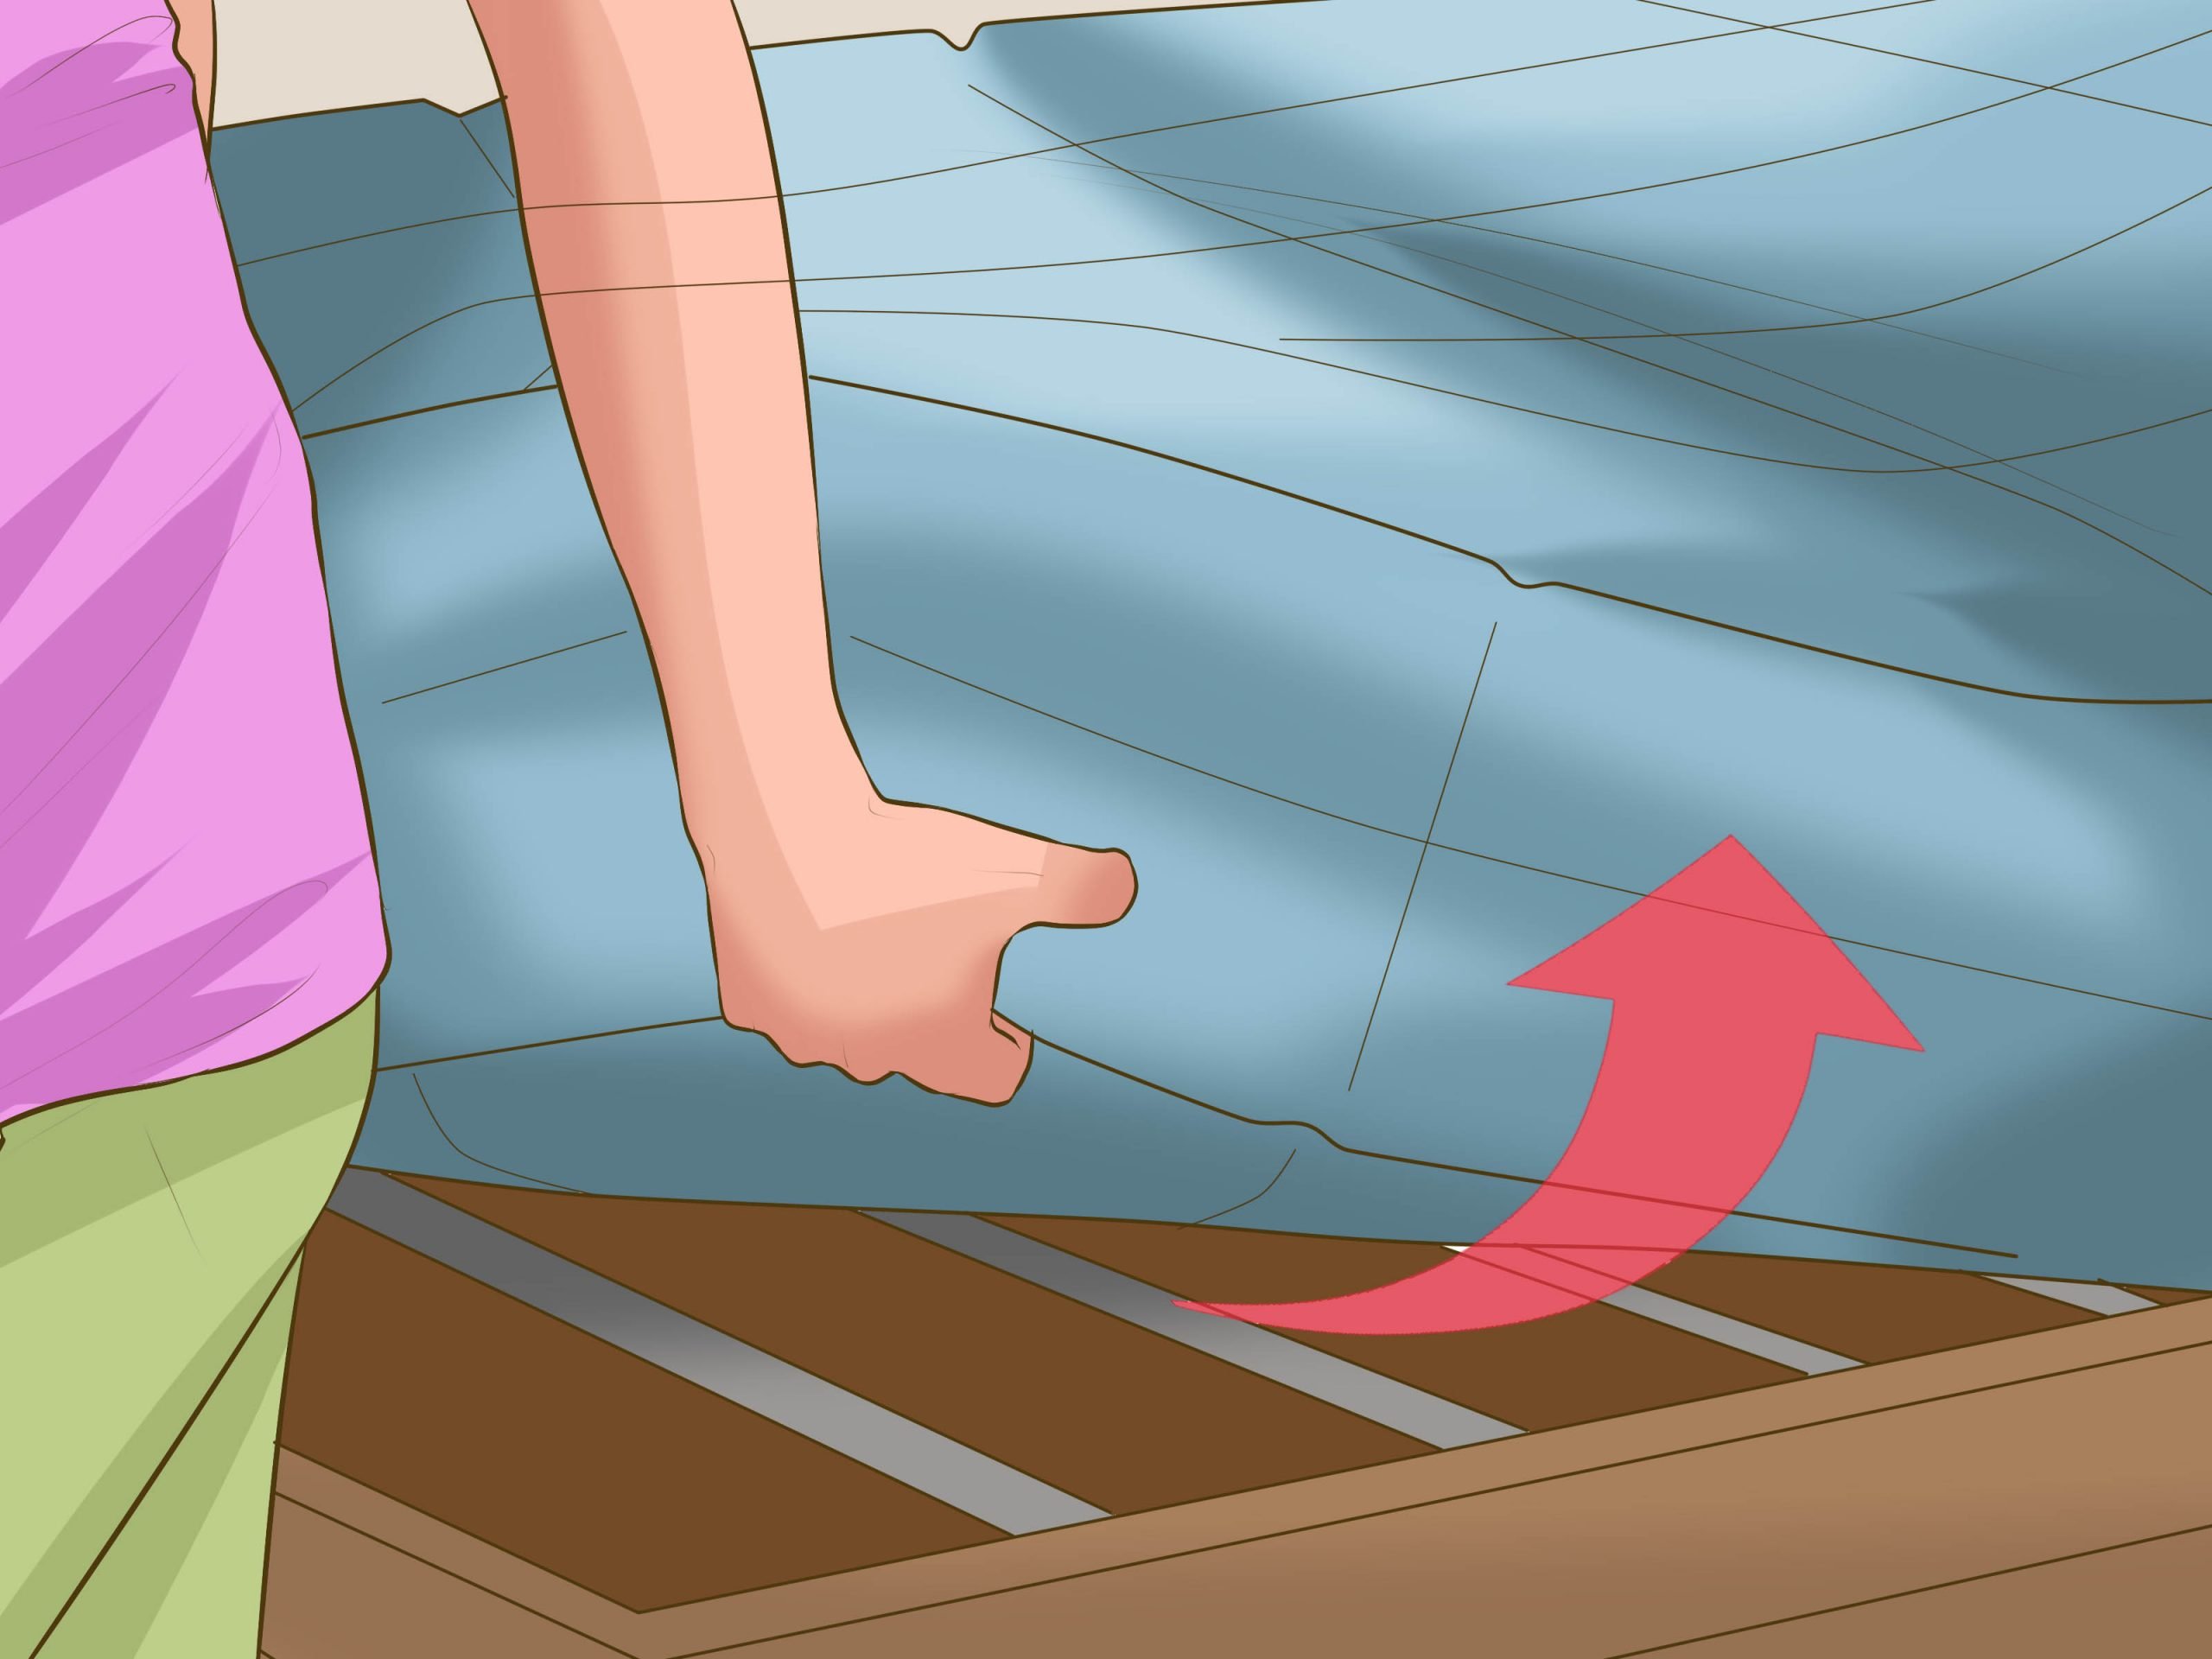 How to Rotate a Mattress: 9 Steps (with Pictures)